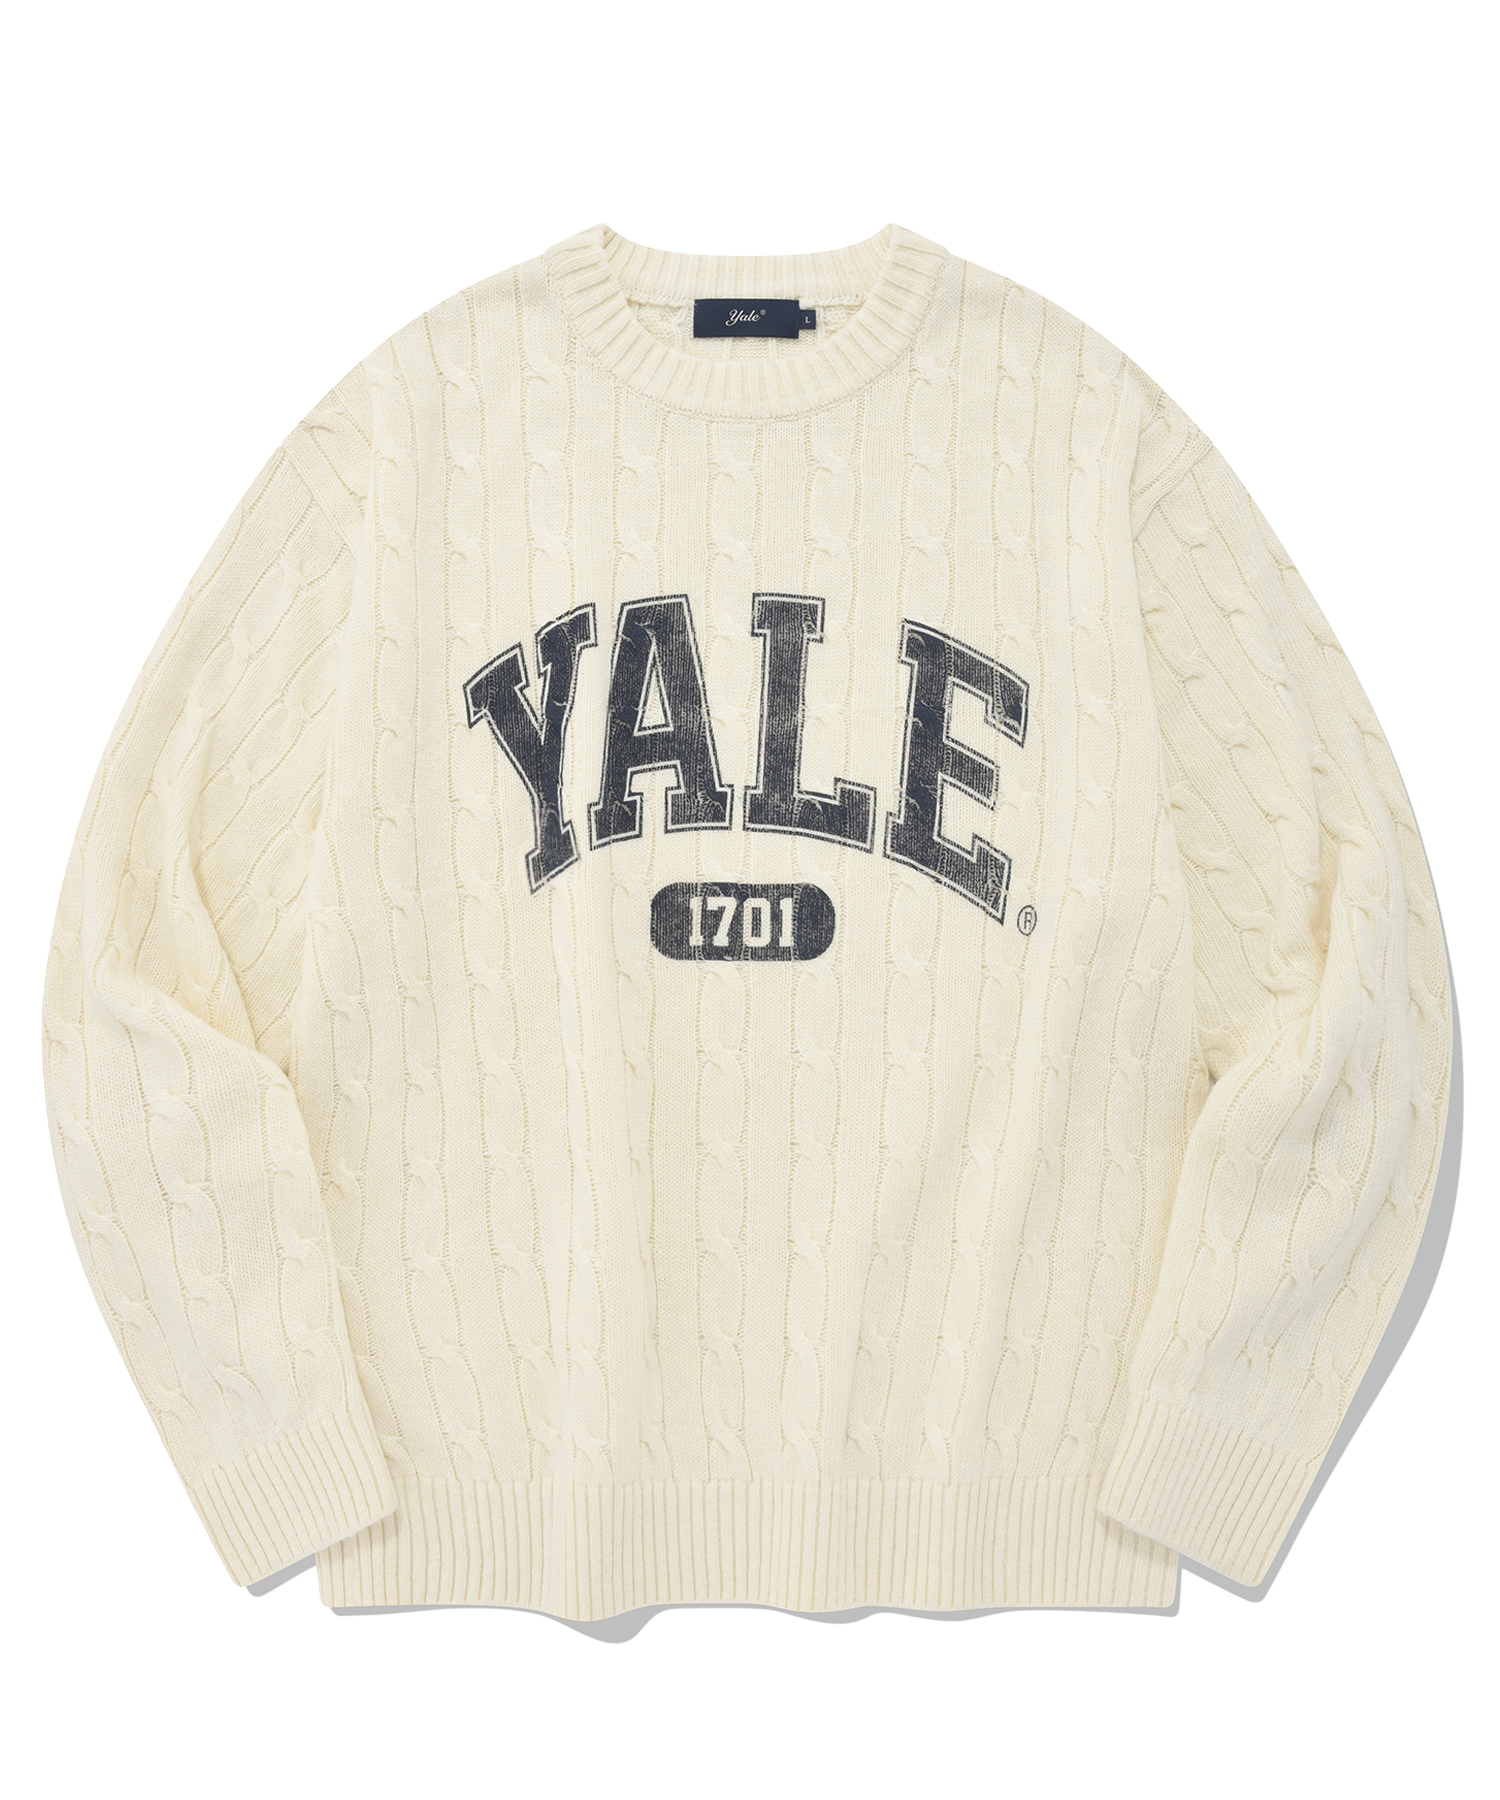 2 TONE ARCH LOGO CABLE KNIT IVORY